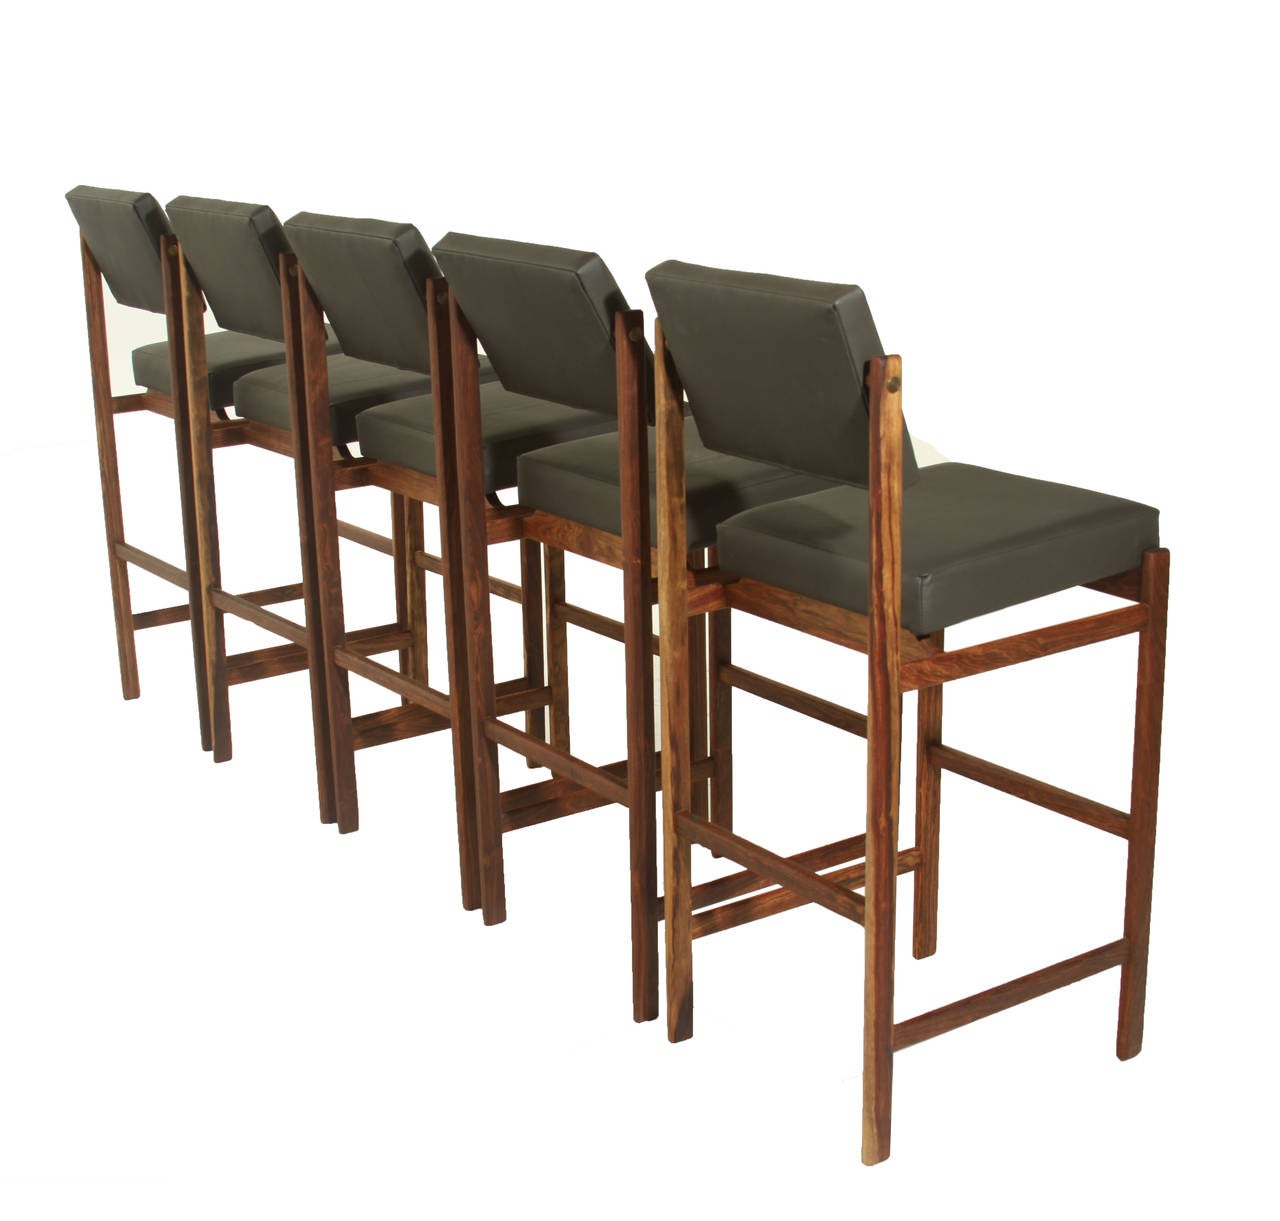 A custom, elegant solid wood framed stool available in a variety of woods and finishes, pivoting back, and upholstered seat by Thomas Hayes Studio. The angle of the back creates good lumbar support. The frames are accented with solid patinated brass